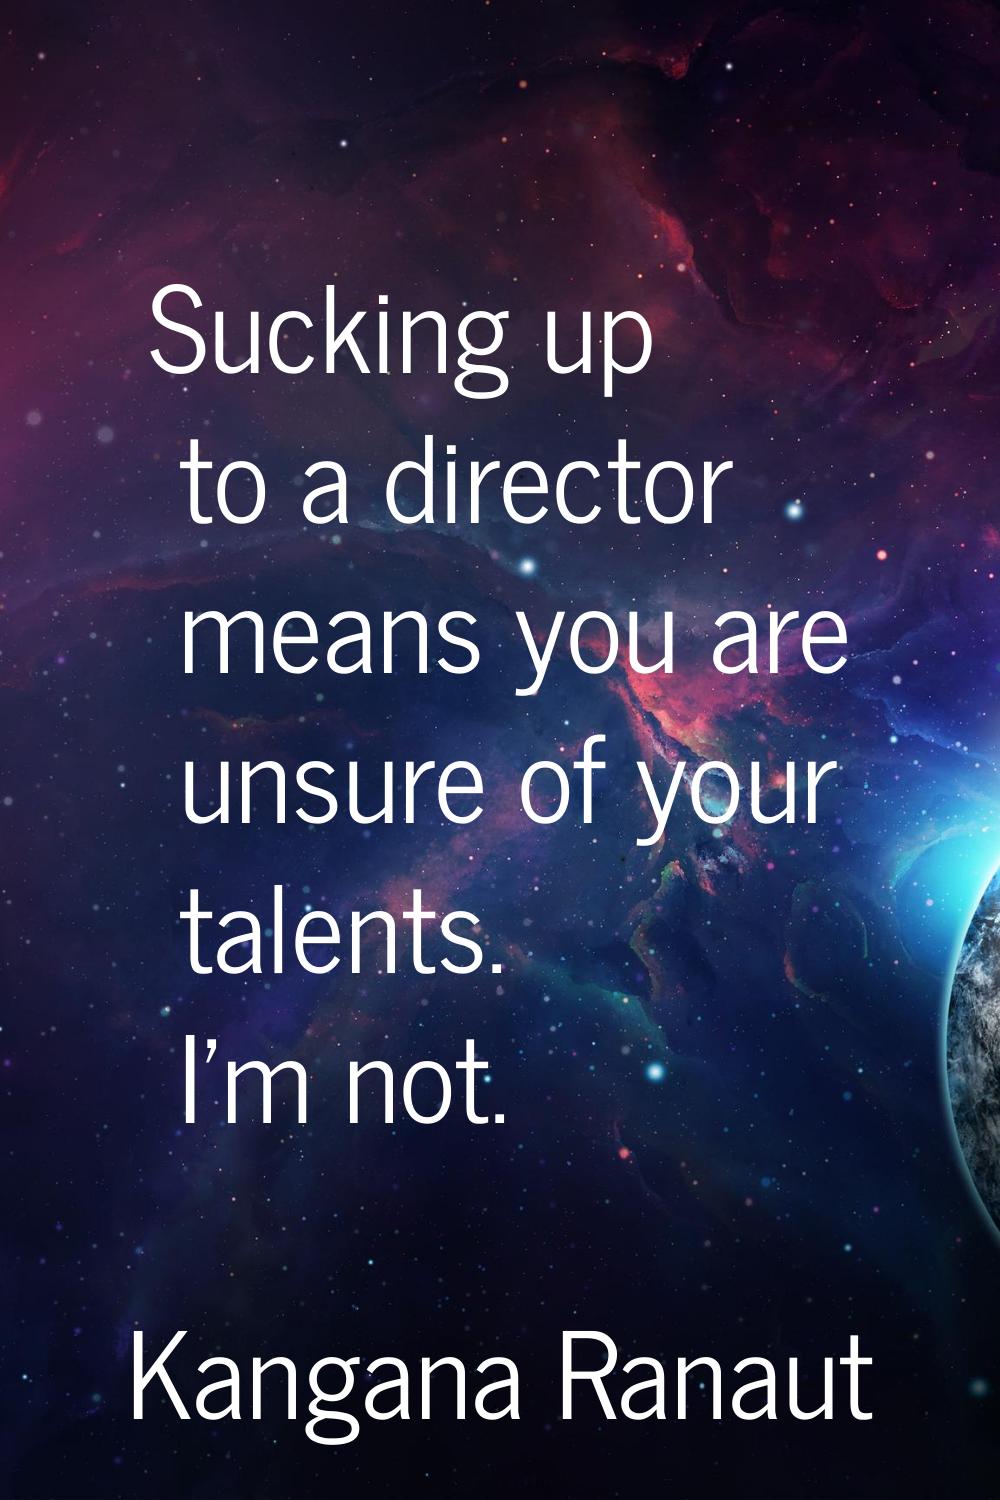 Sucking up to a director means you are unsure of your talents. I'm not.